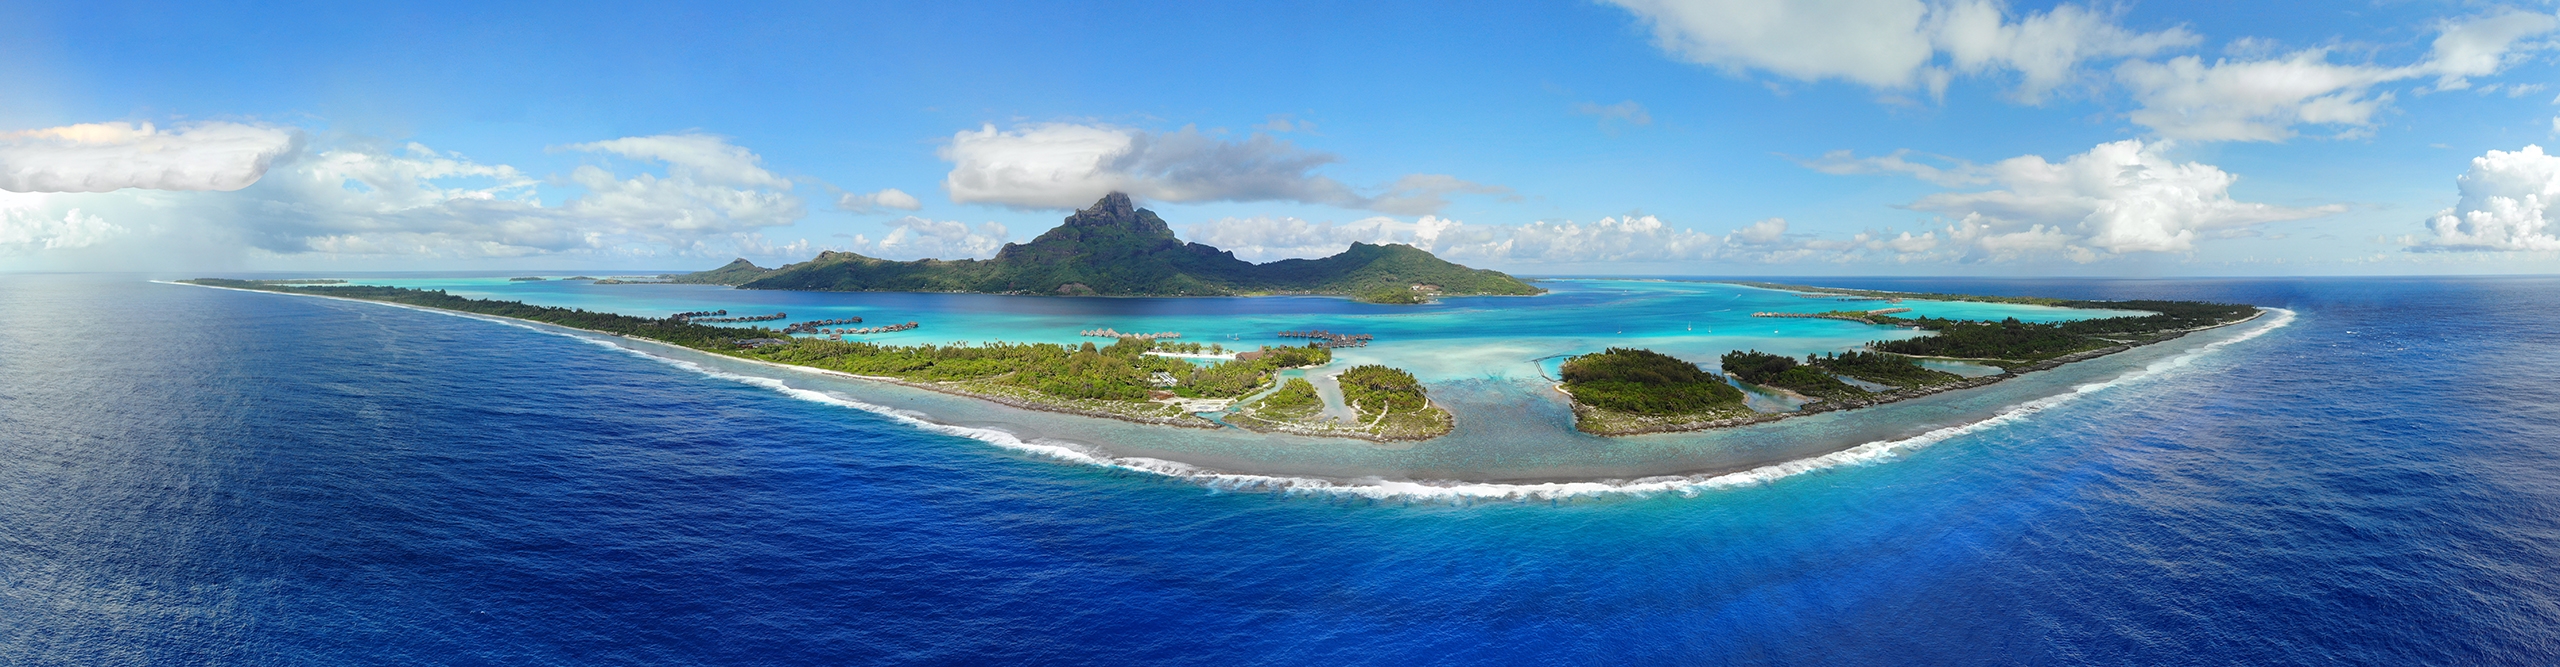 Aerial view of the island of Bora Bora in French Polynesia, surrounded by a turquoise lagoon